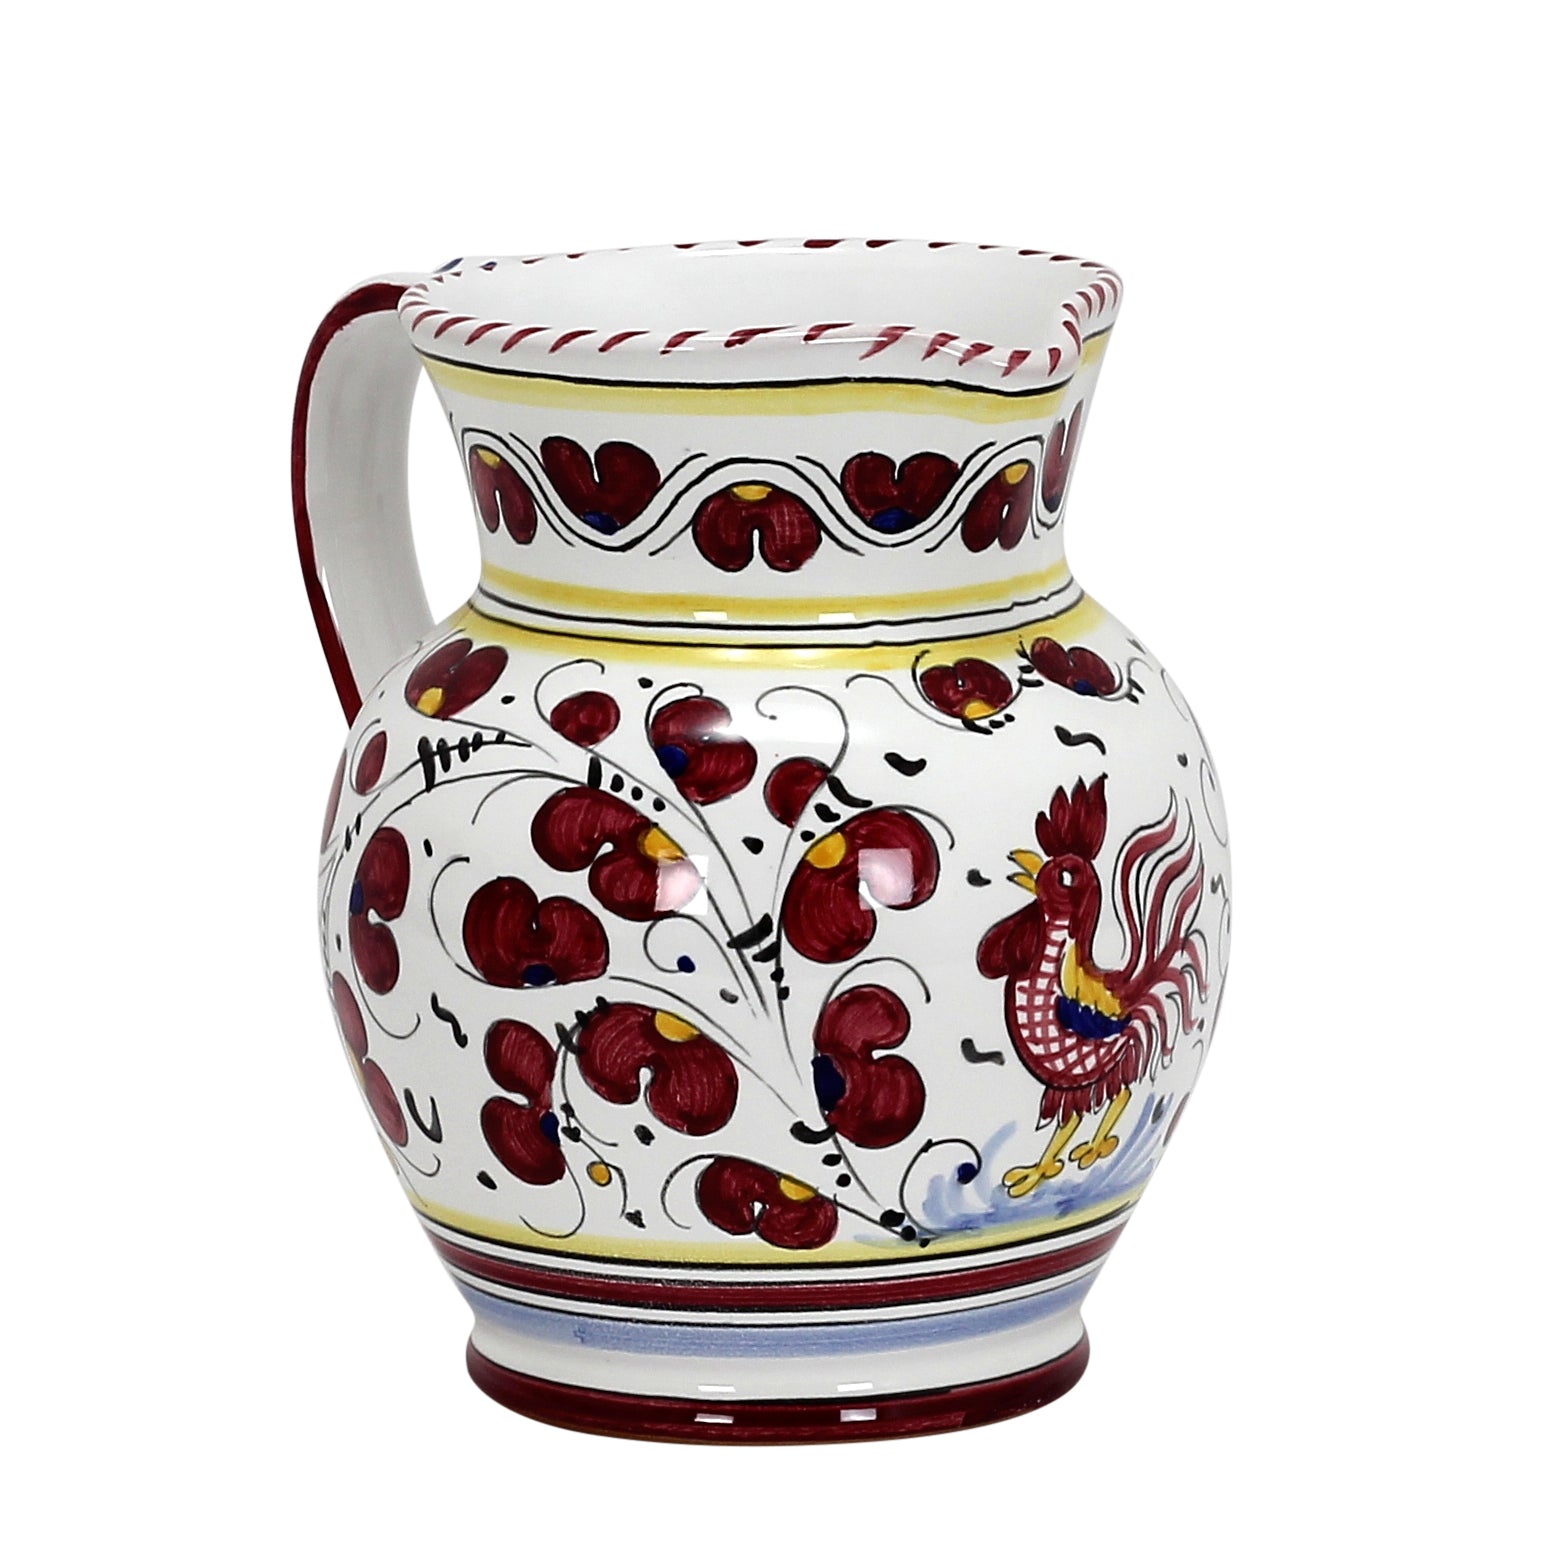 ORVIETO RED ROOSTER: Traditional Deruta Pitcher (1.25 Liters/40 Oz/5 Cups) - Artistica.com